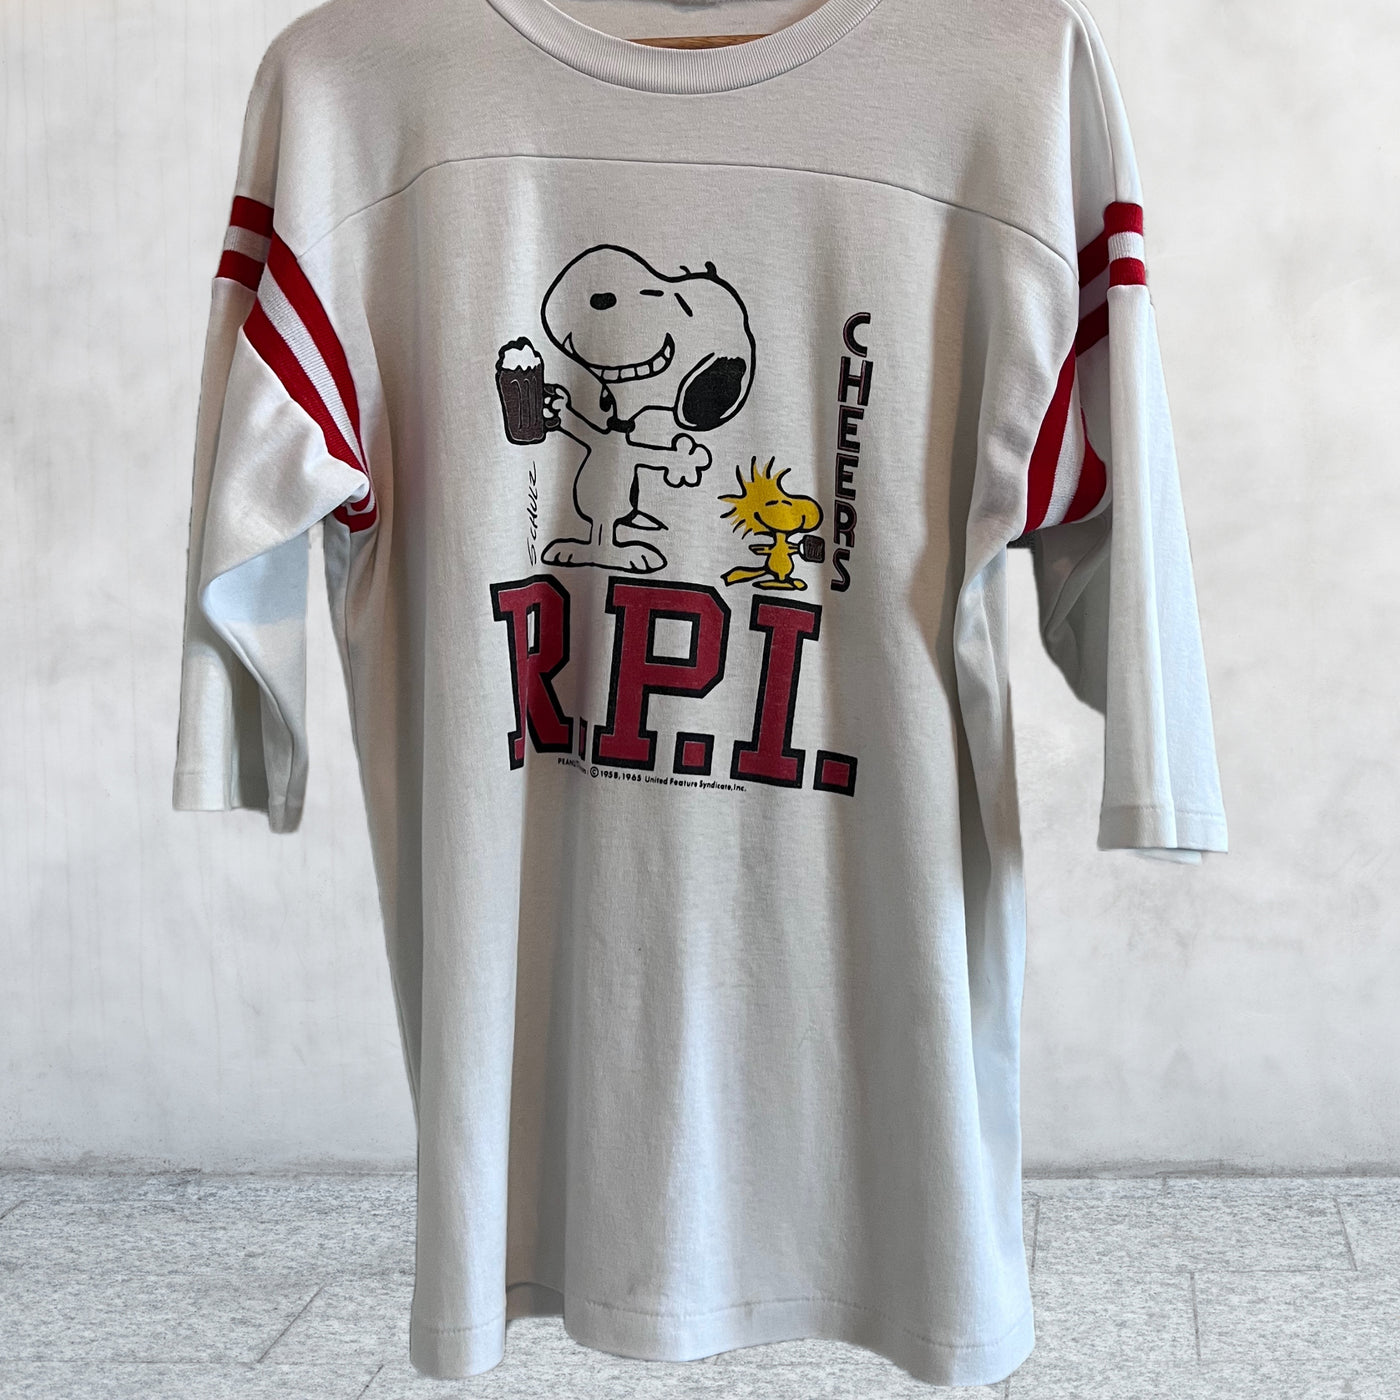 Vintage 80's SS Snoopy R.P.I. Cheers T-shirt